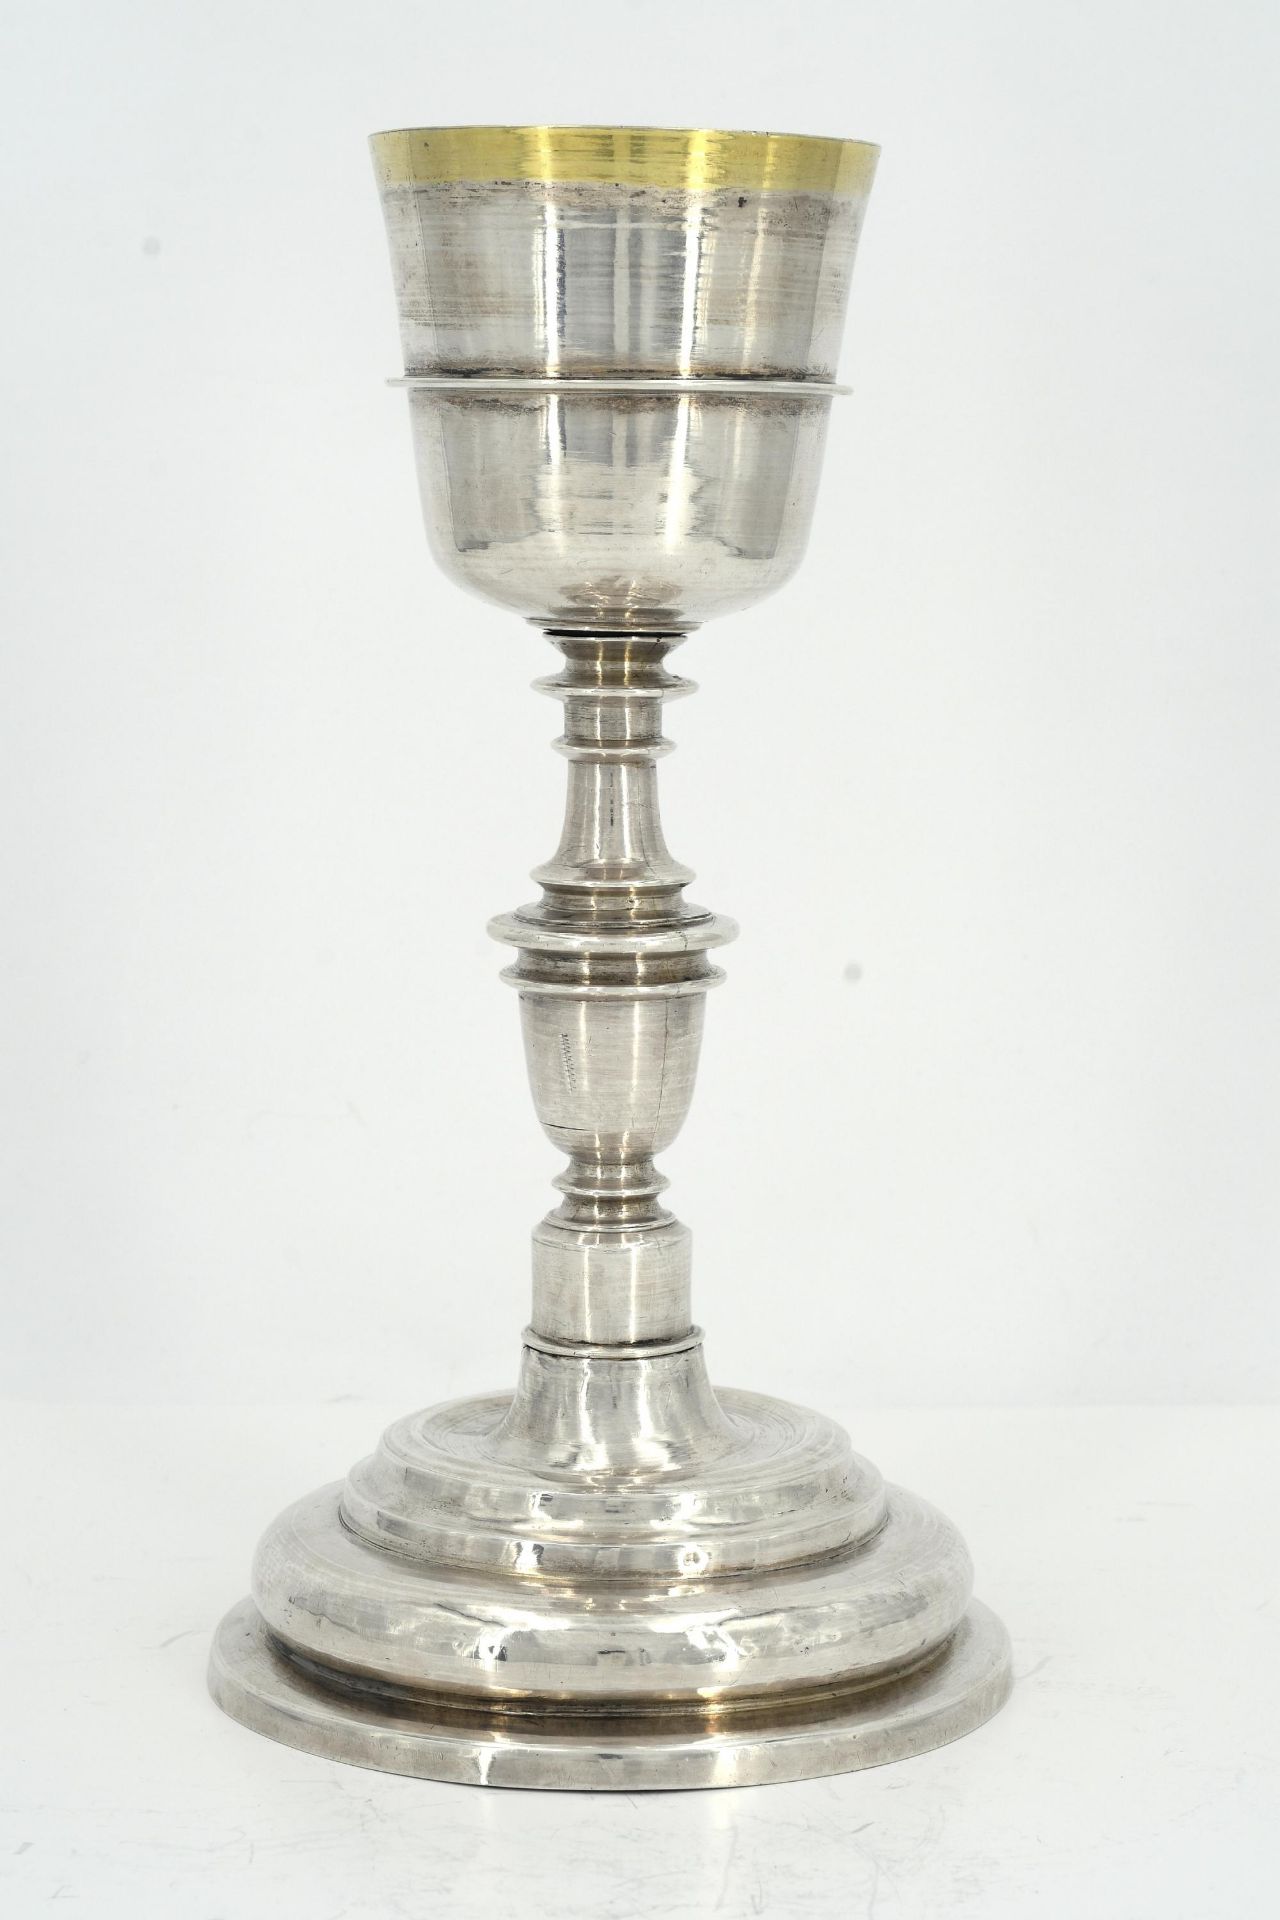 Silver goblet - Image 3 of 7